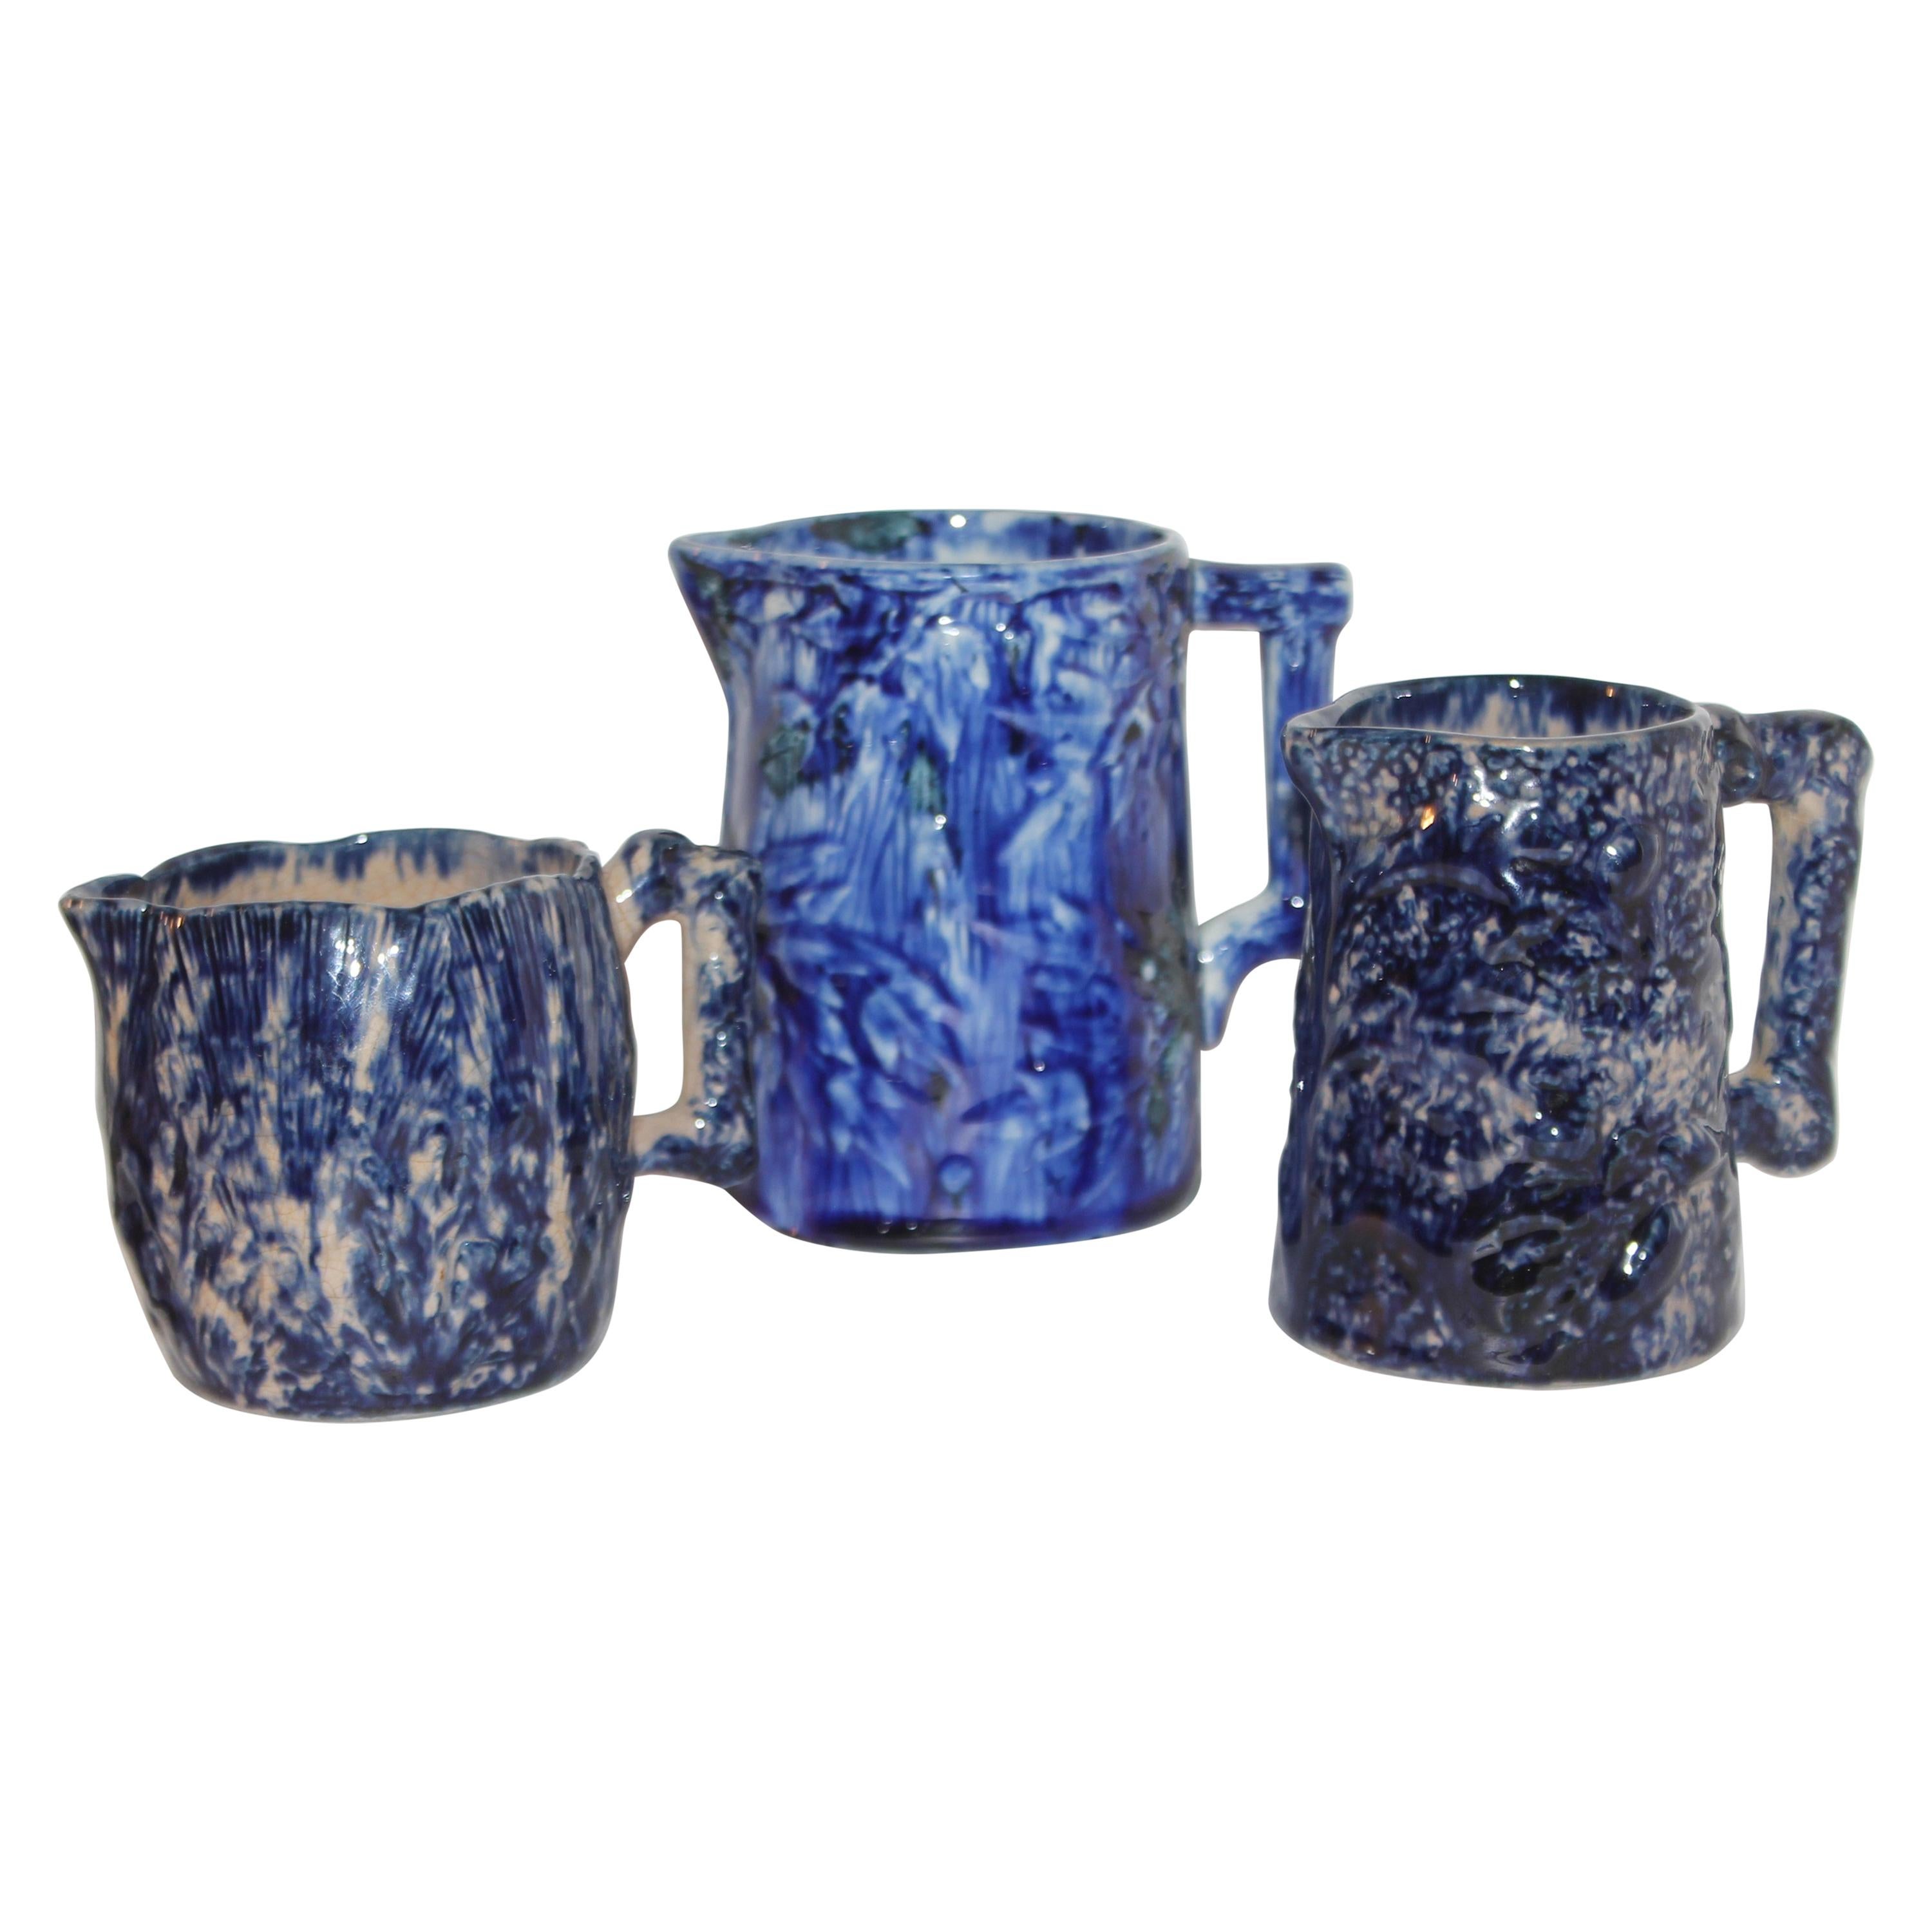 Collection of Three Sponge Ware Pitchers, 3